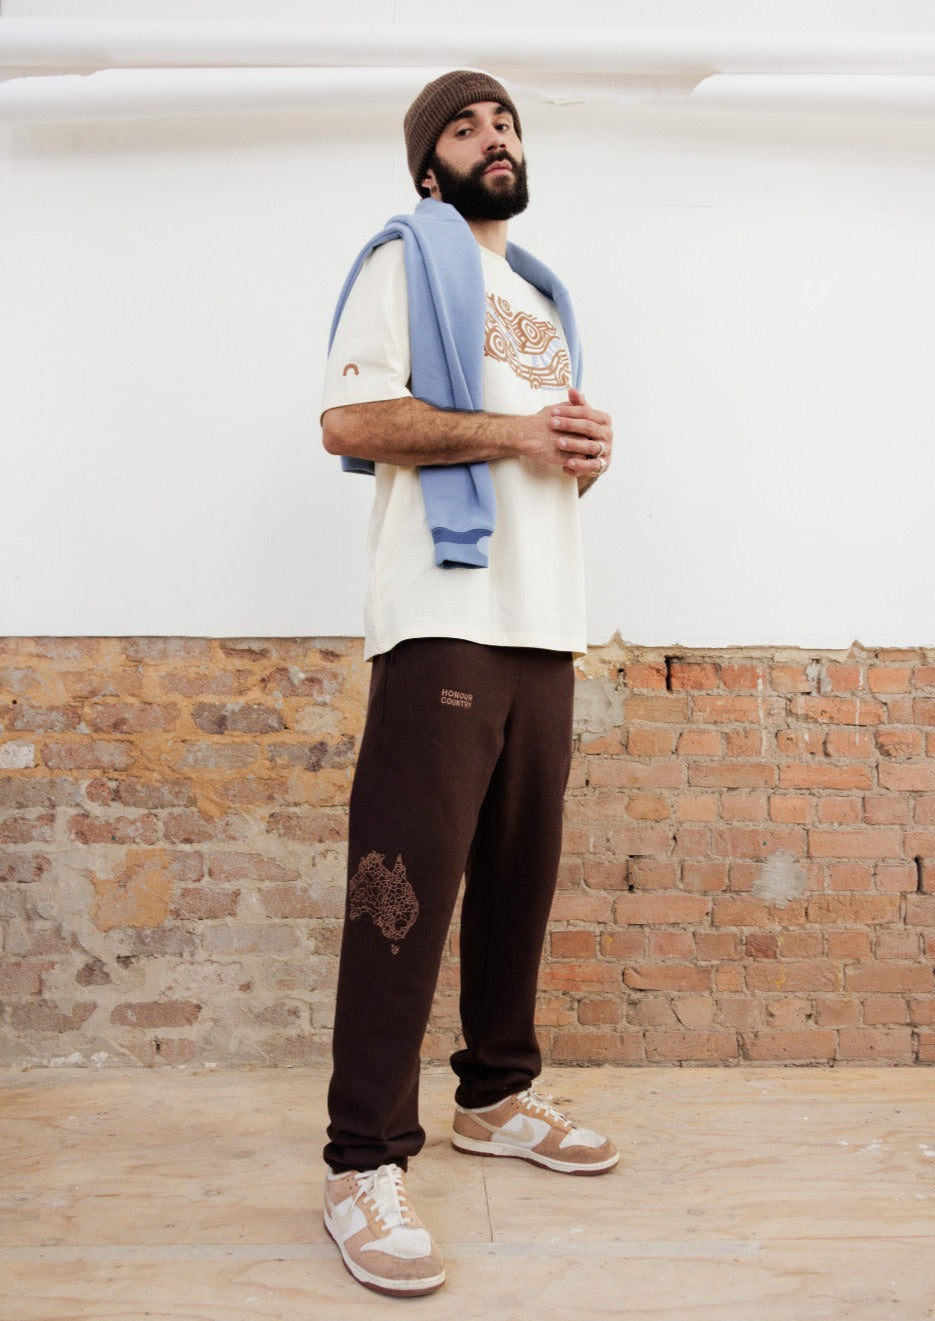 Clothing The Gaps. Brown honour country track pants. Chocolate brown warm track pants. With embroidered decolonised map of 'Australia' in tonal lighter brown on side of right knee and above the embroidered phrase 'Honour Country' in the same tonal lighter brown on middle of right thigh. Features deep side pockets, elastic waist with brown draw strings.